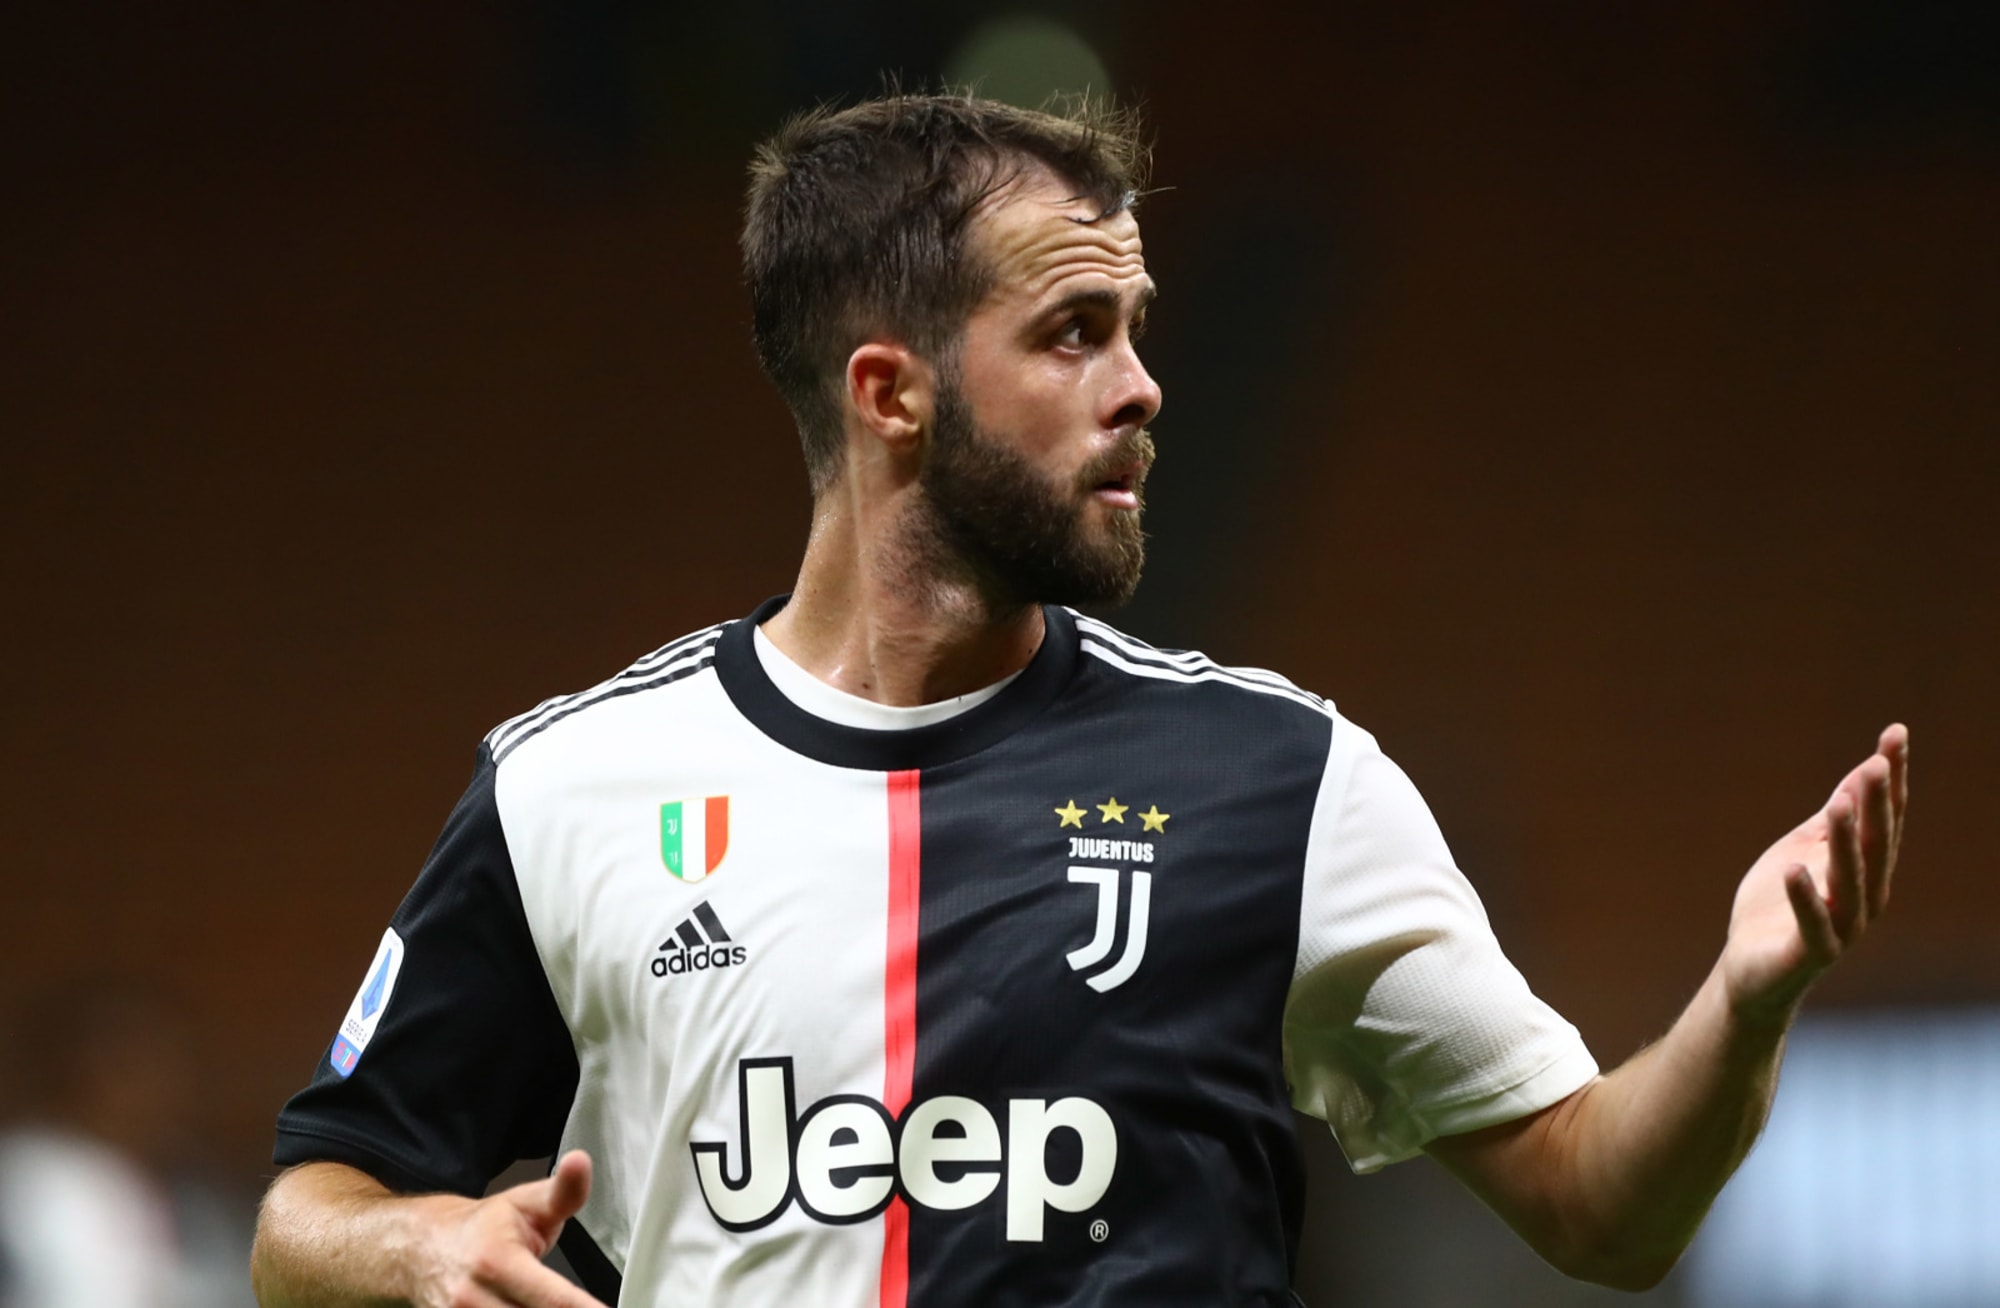 Juventus Transfers: Miralem Pjanic could be part of another swap deal